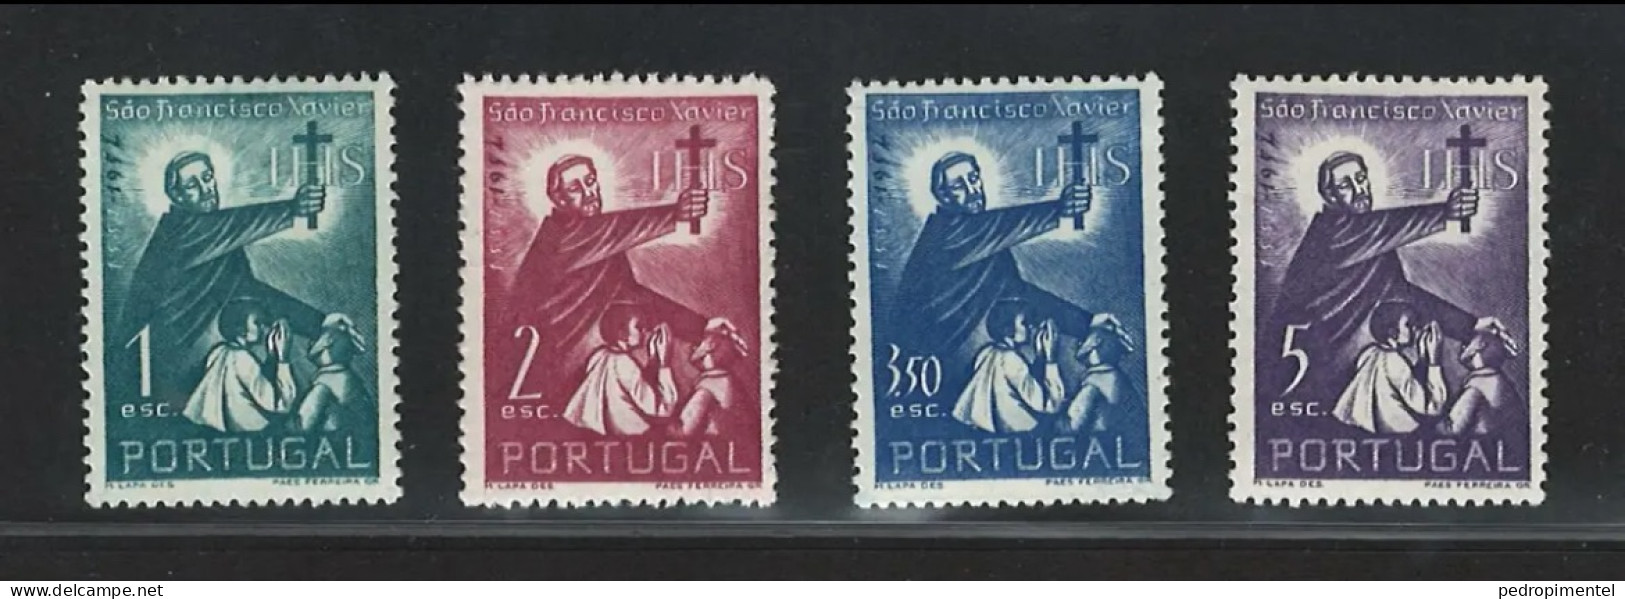 Portugal Stamps 1952 "Saint Francis" Condition MH OG #691-694 - Neufs